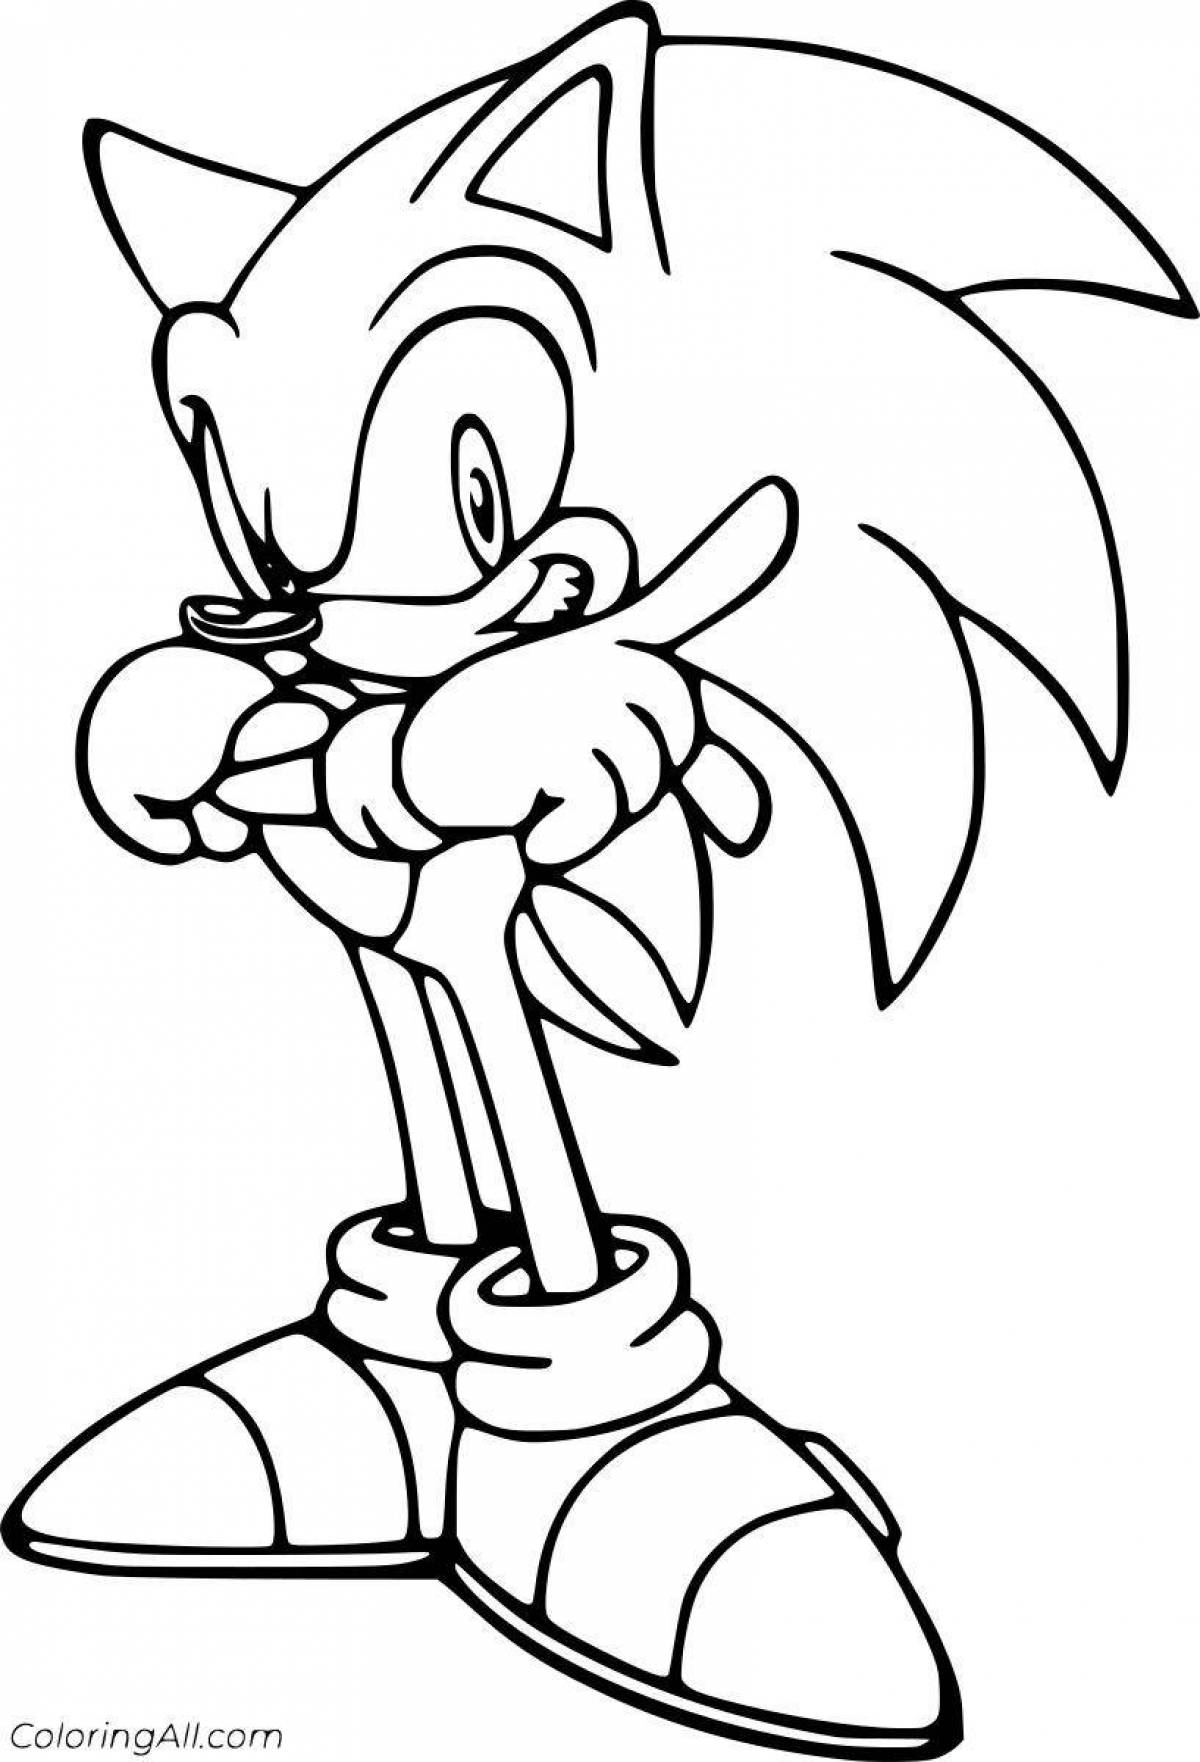 Charming sonic hedgehog coloring book